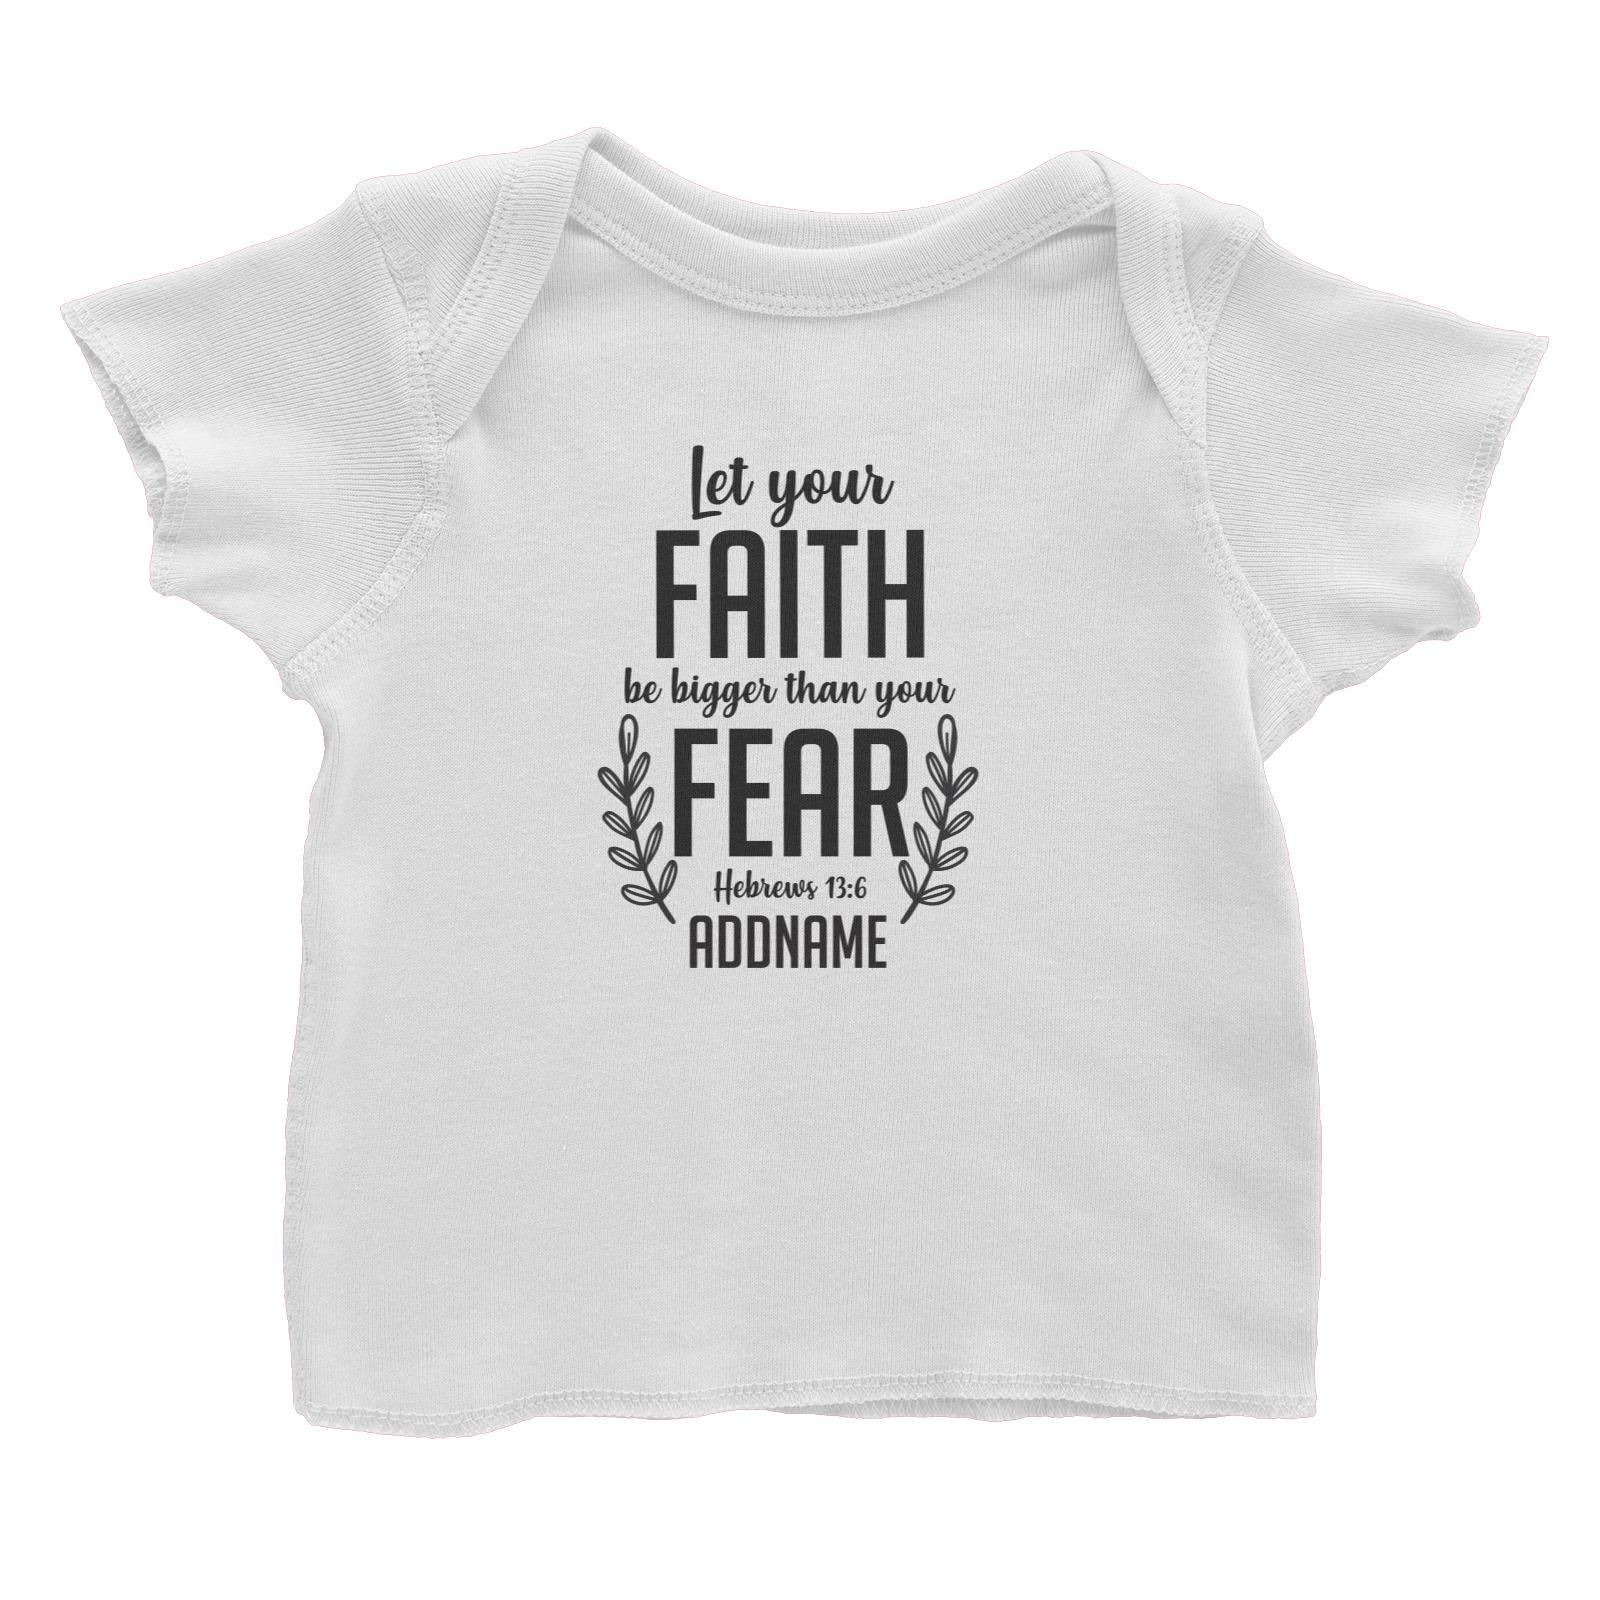 Christ Newborn Let Your Faith Be Bigger Than Your Fear Hebrews 13.6 Addname Baby T-Shirt